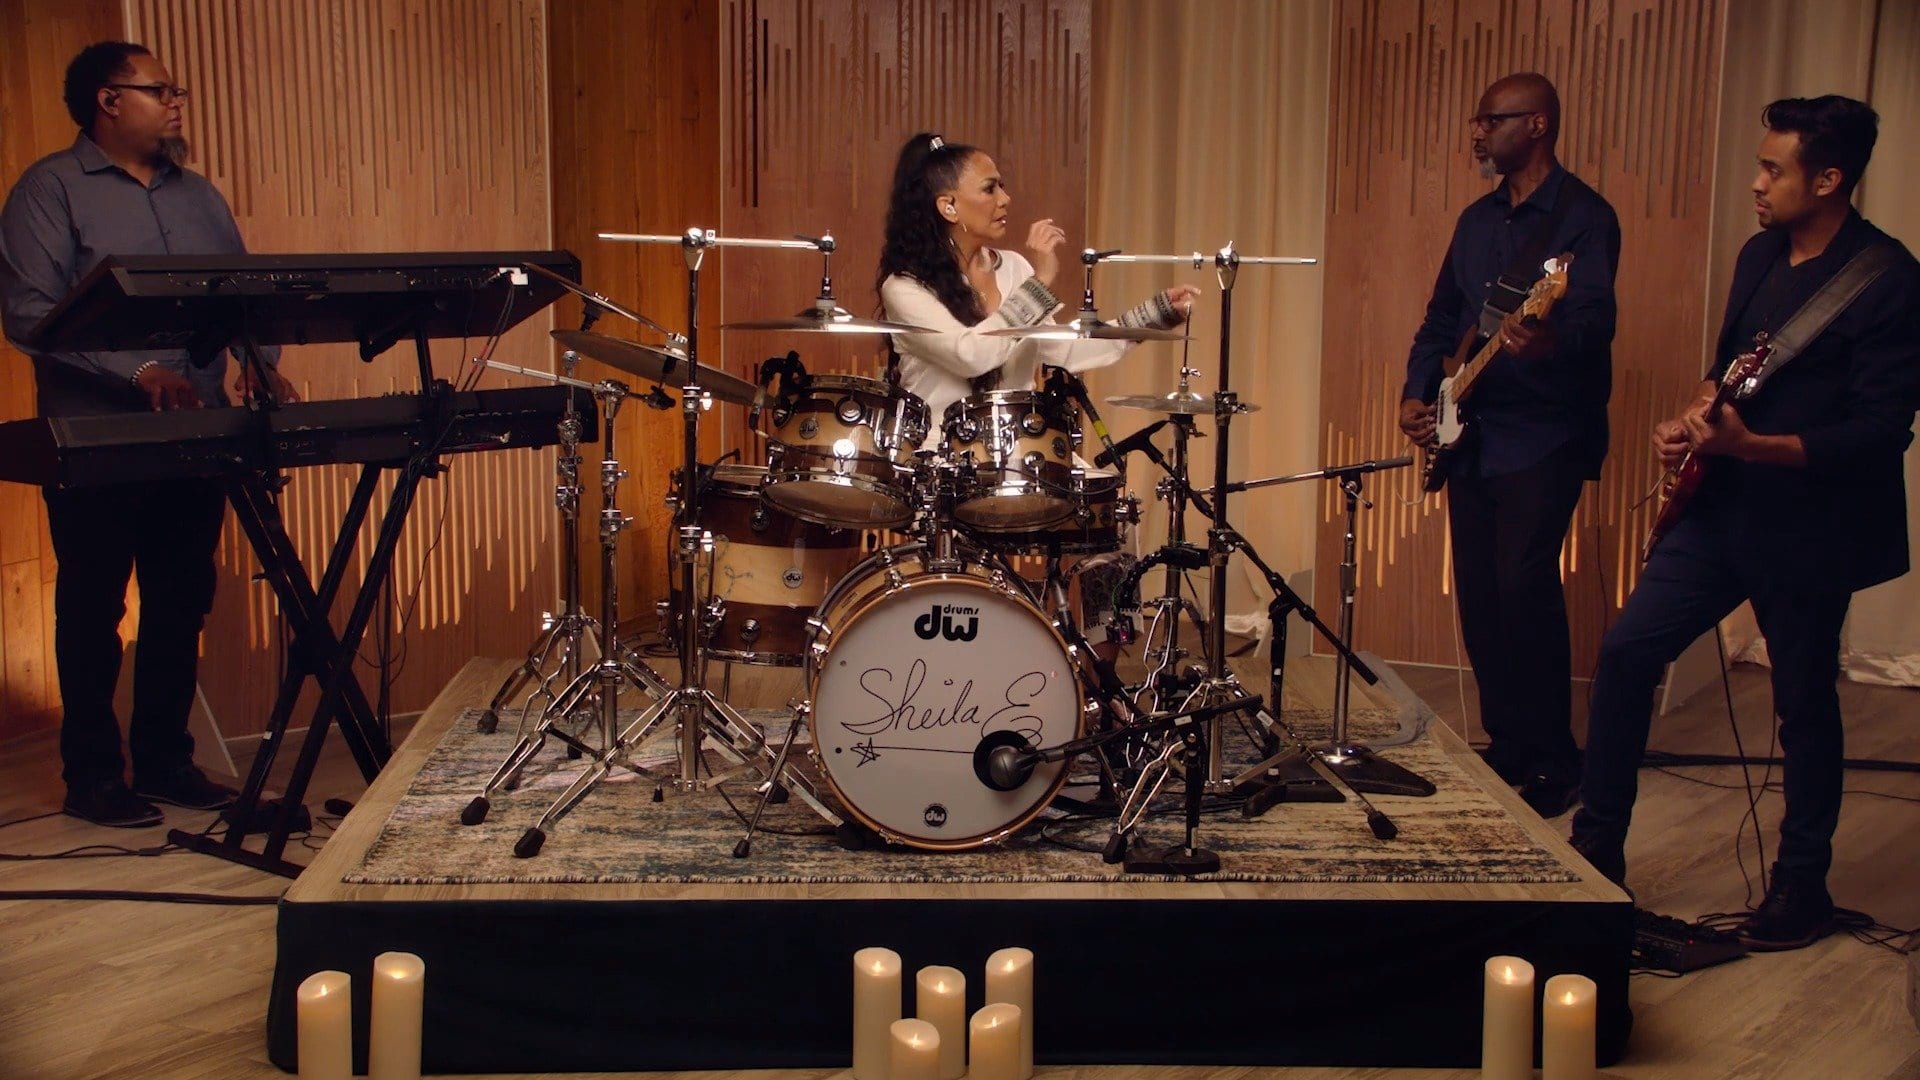 The Crucial Ethics In Drumming For A Band Sheila E.